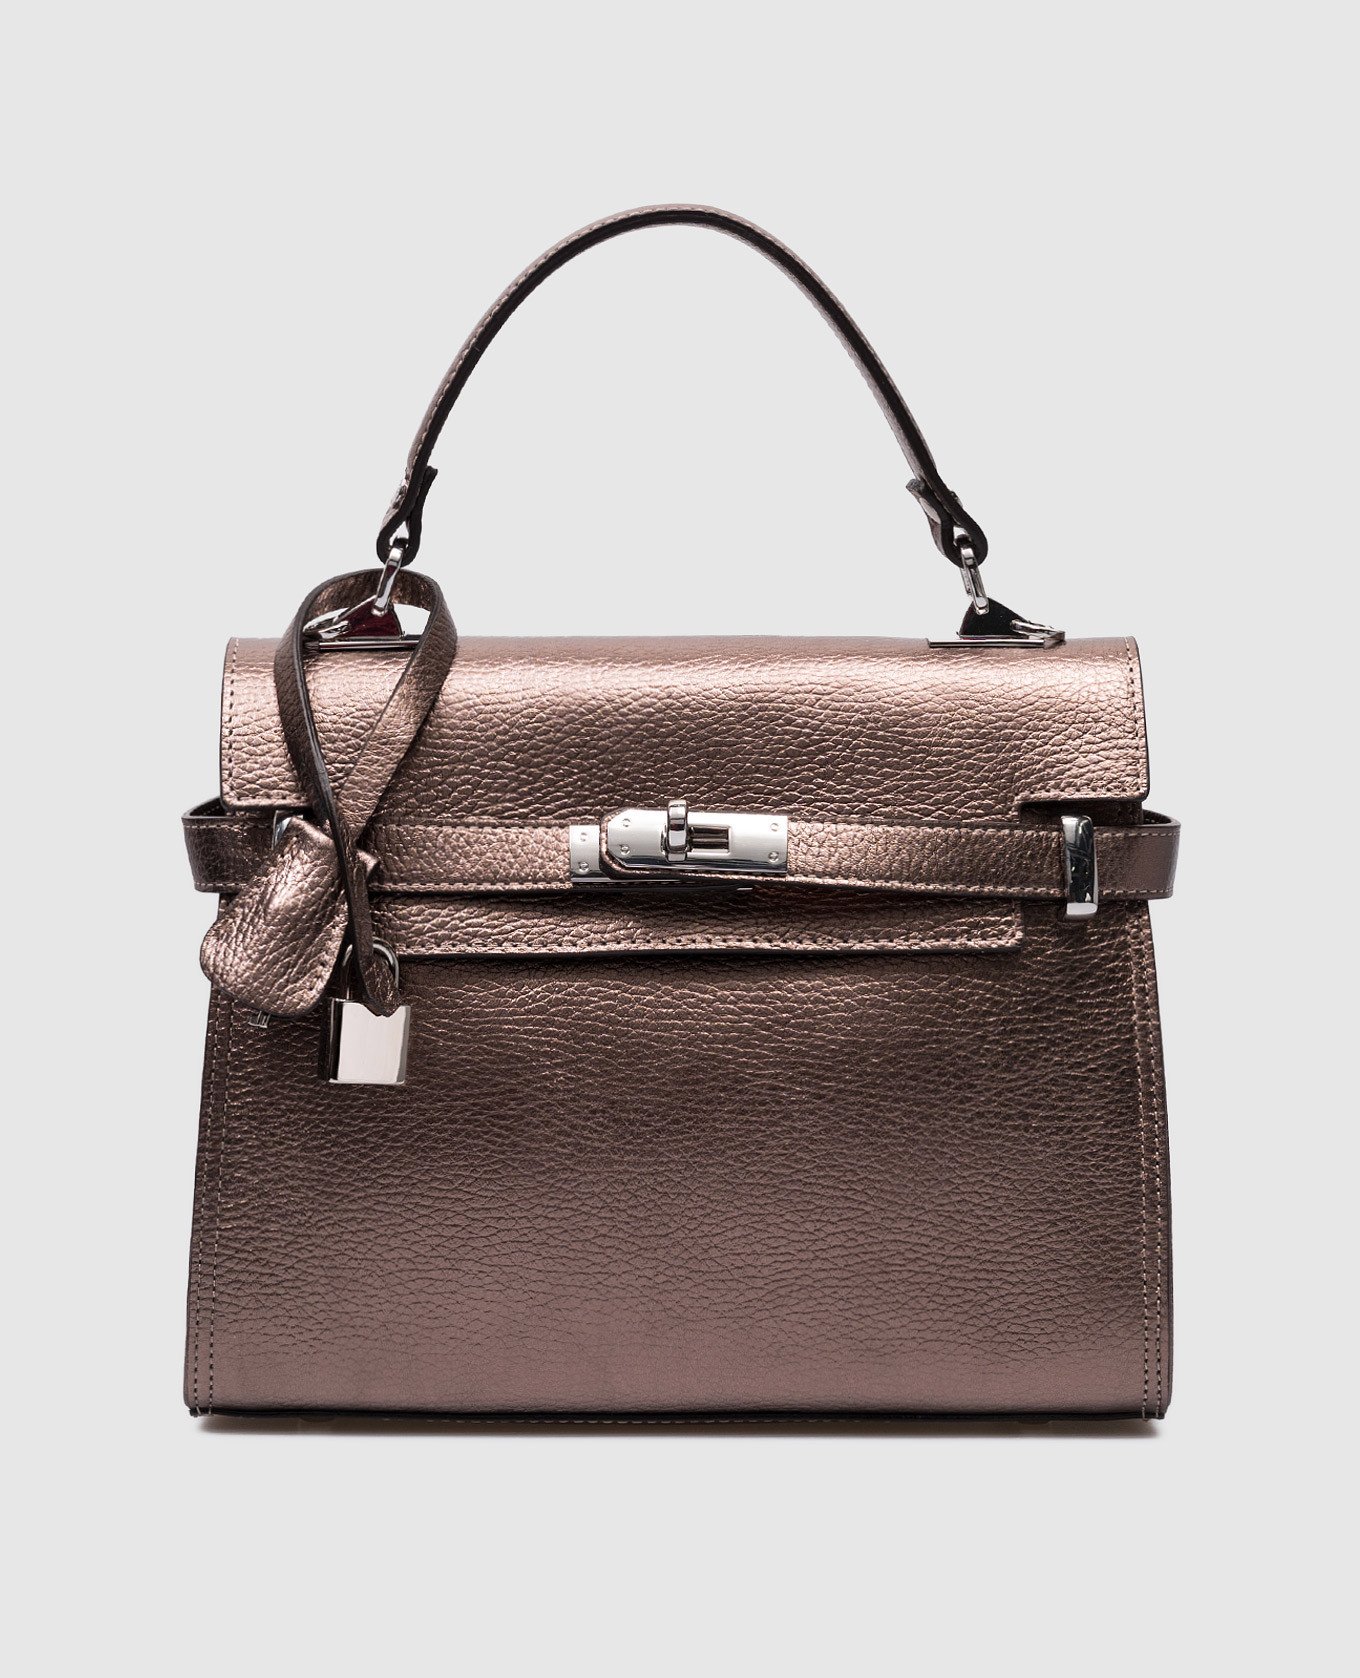 Brown leather satchel bag with a shiny effect